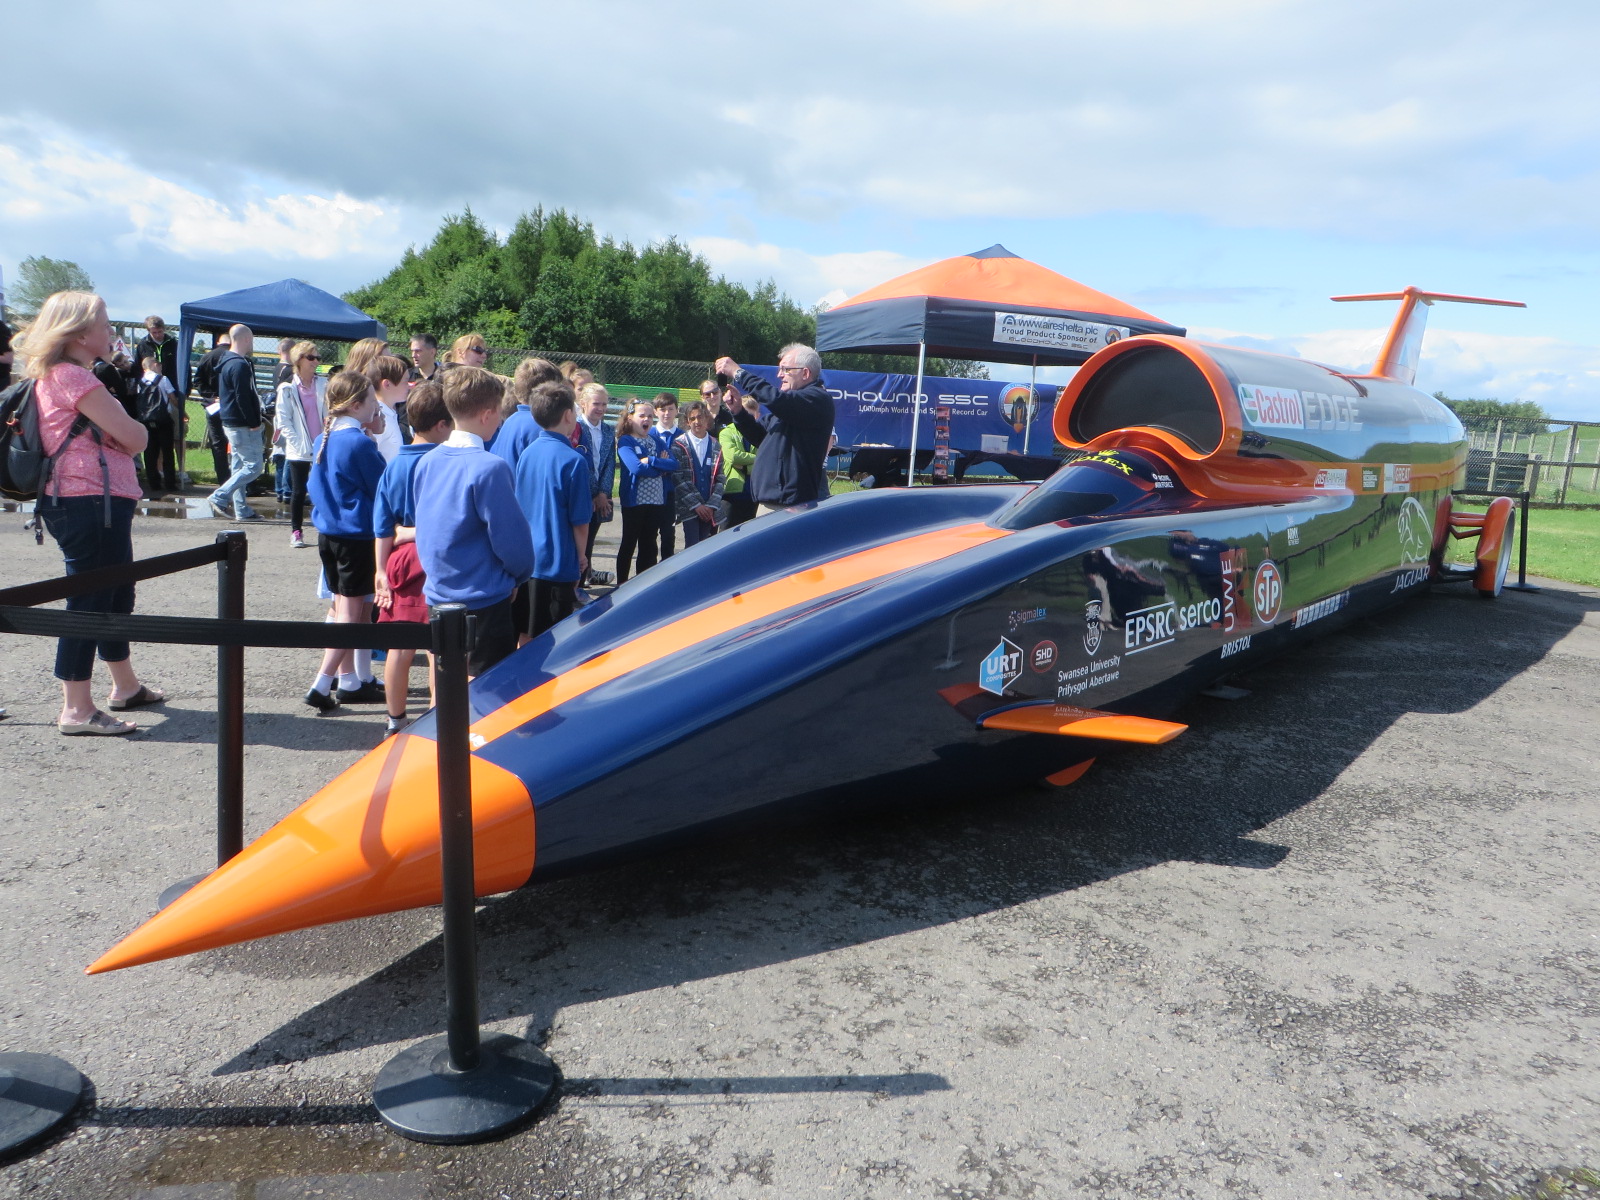 The Bloodhound Activity at the Greenpower Heat